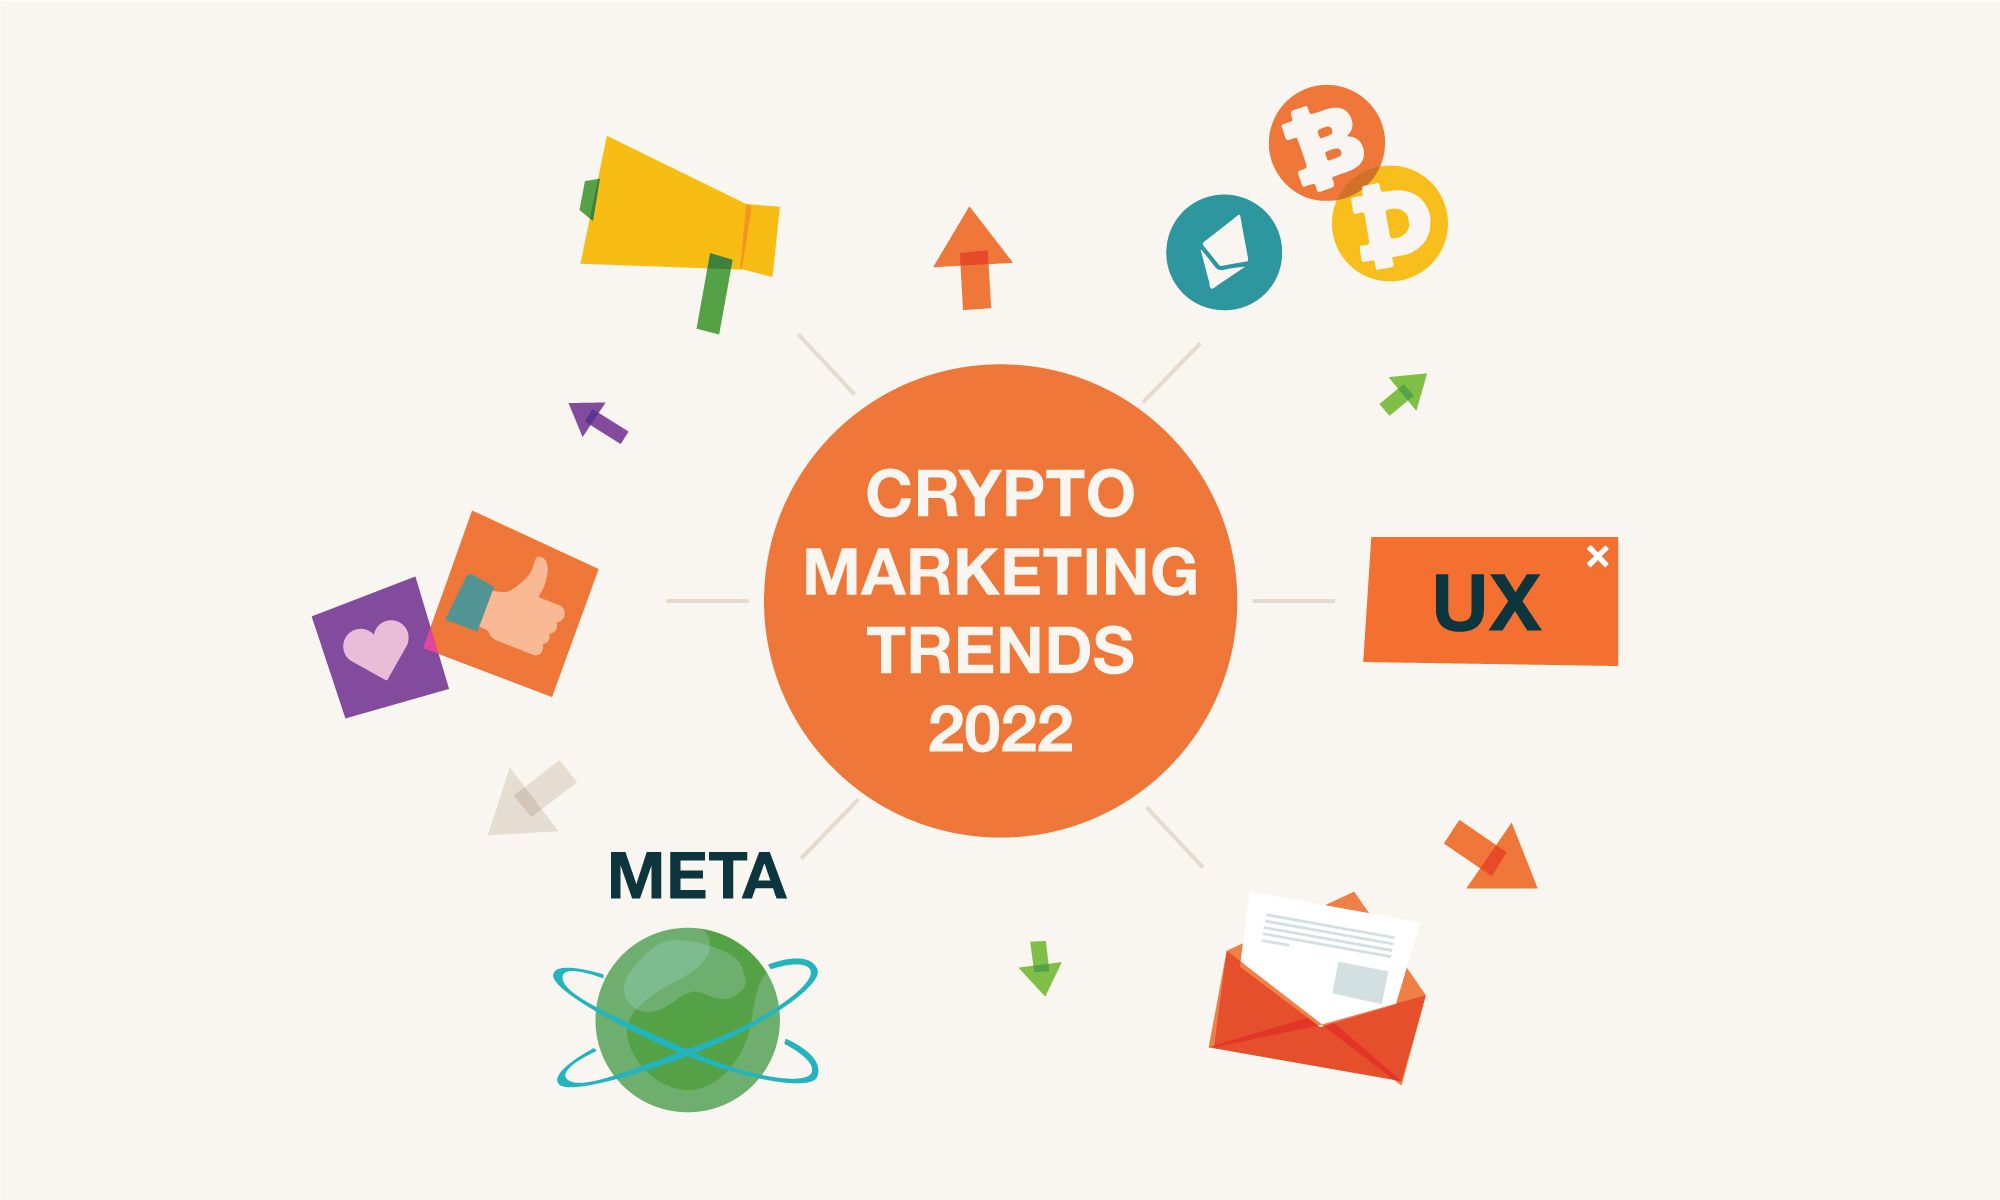 Marketing Trends Crypto Businesses Should Pay Attention To In 2022